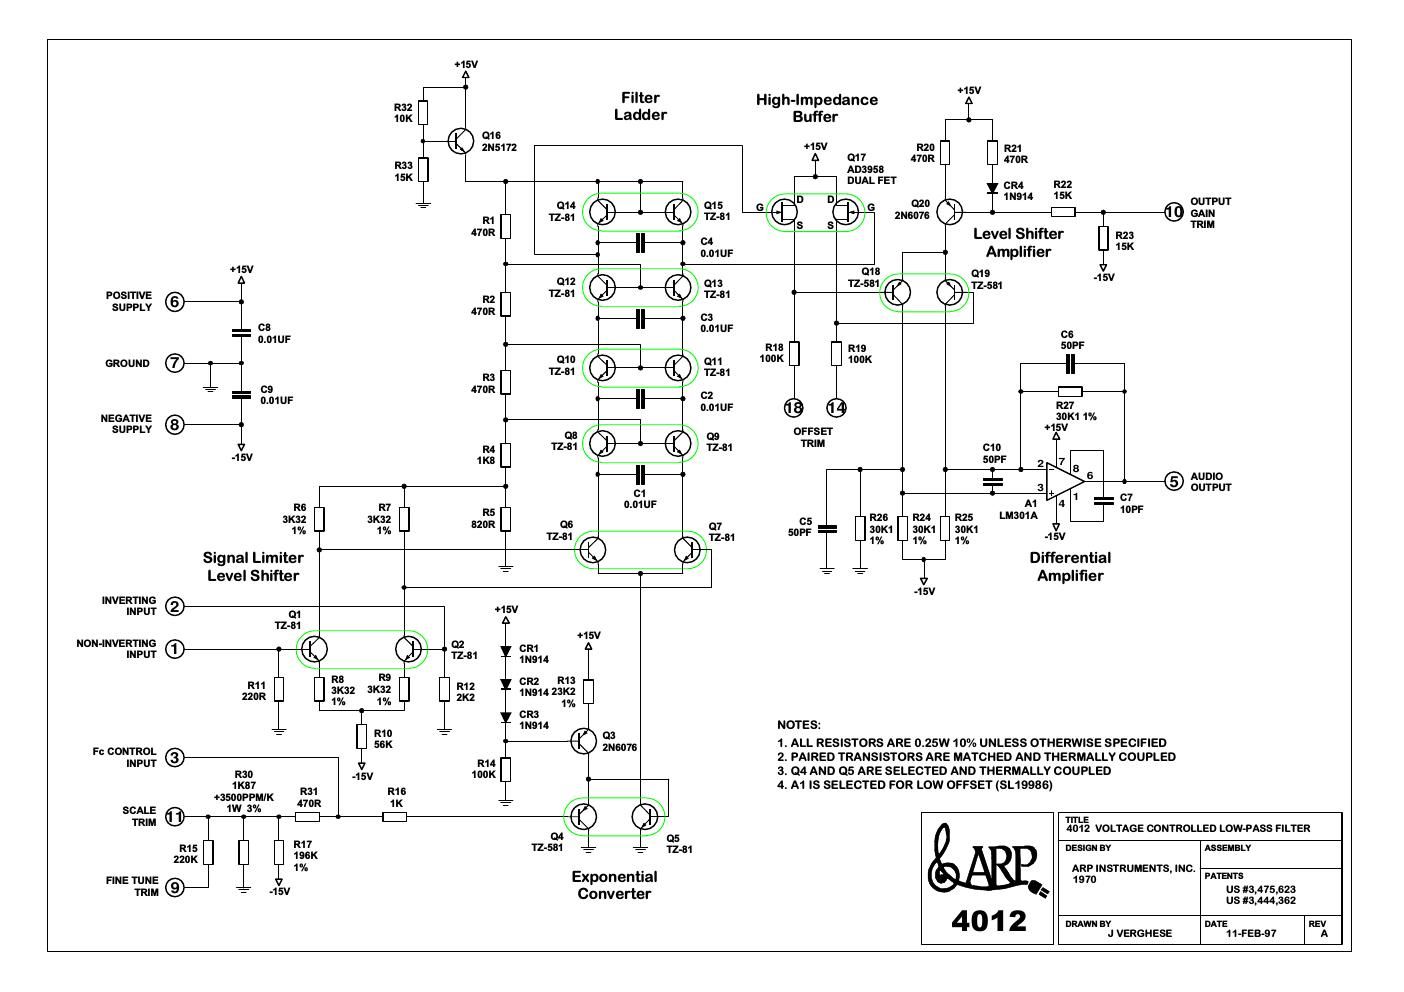 arp 4012 voltage controlled low pass filter submodules